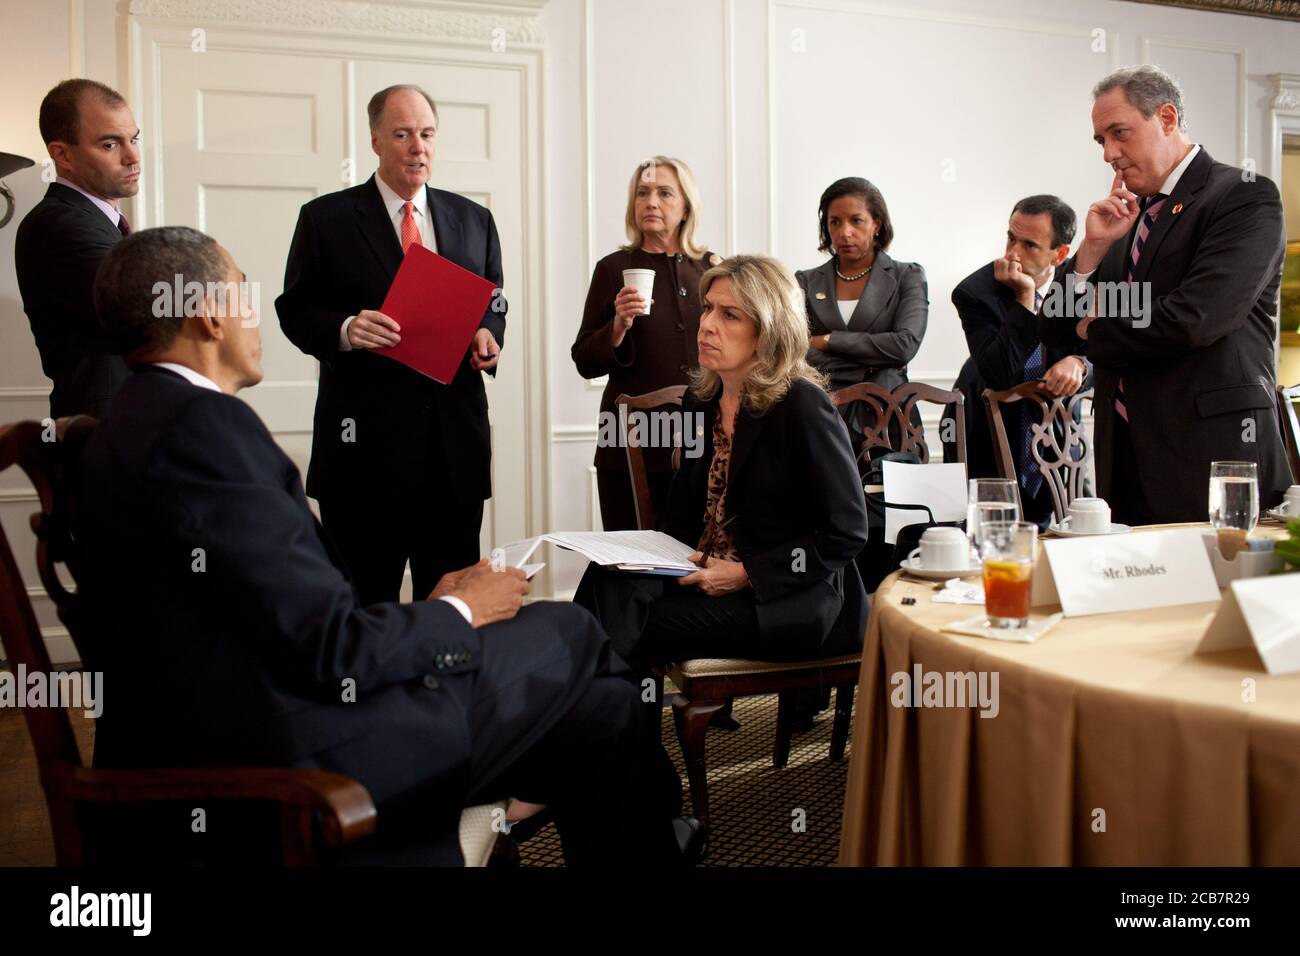 President Barack Obama meets with advisors before a bilateral meeting with Prime Minister David Cameron of the United Kingdom at the Waldorf Astoria Hotel in New York N.Y. Sept. 21 2011. From left are: Ben Rhodes Deputy National Security Advisor for Strategic Communications; National Security Advisor Tom Donilon; Secretary of State Hillary Rodham Clinton; Liz Sherwood-Randall Special Assistant to the President and NSC Senior Director for European Affairs; Susan Rice U.S. Ambassador to the United Nations; Phil Gordon Assistant Secretary of State for European and Eurasian Affairs; and Michael Fr Stock Photo